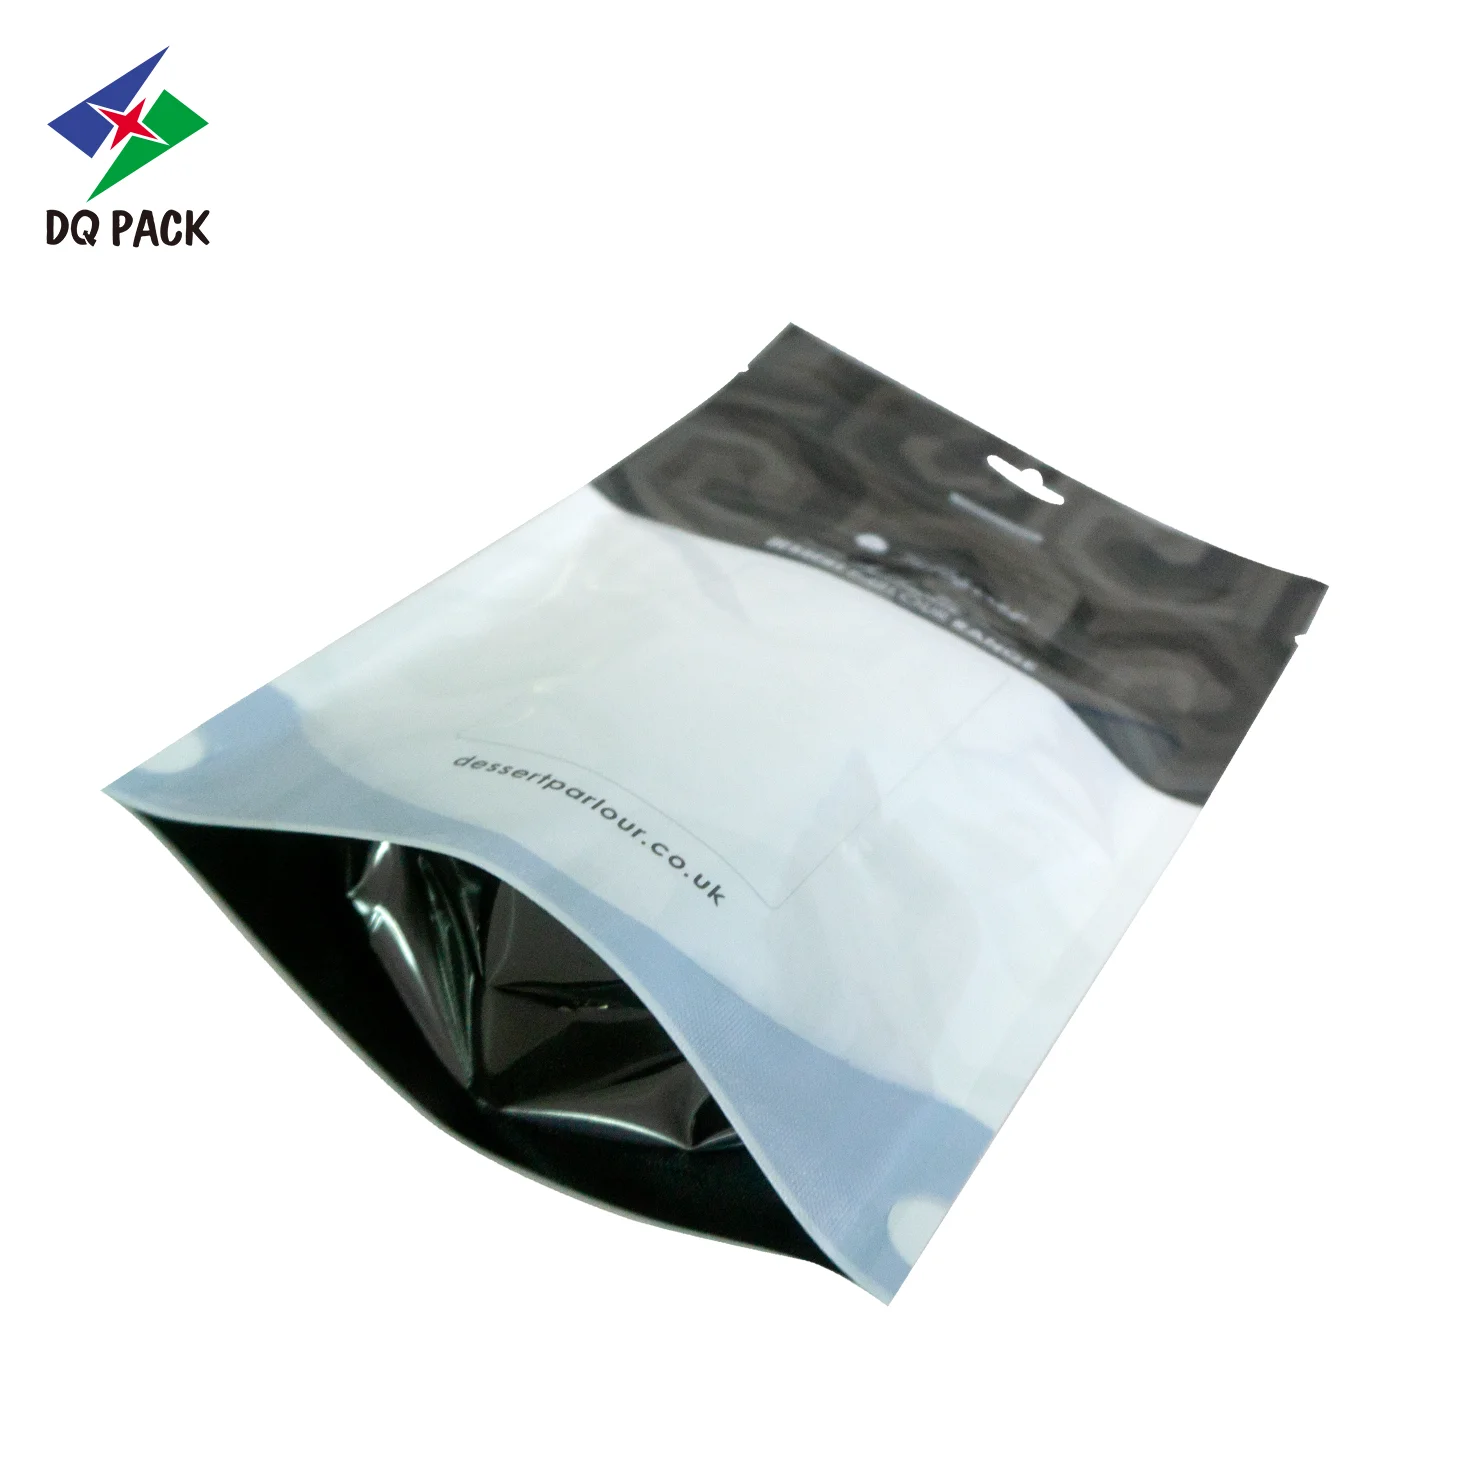 DQ PACK CHINA Stand up Pouch with Zipper snacks zipper bag window pouch